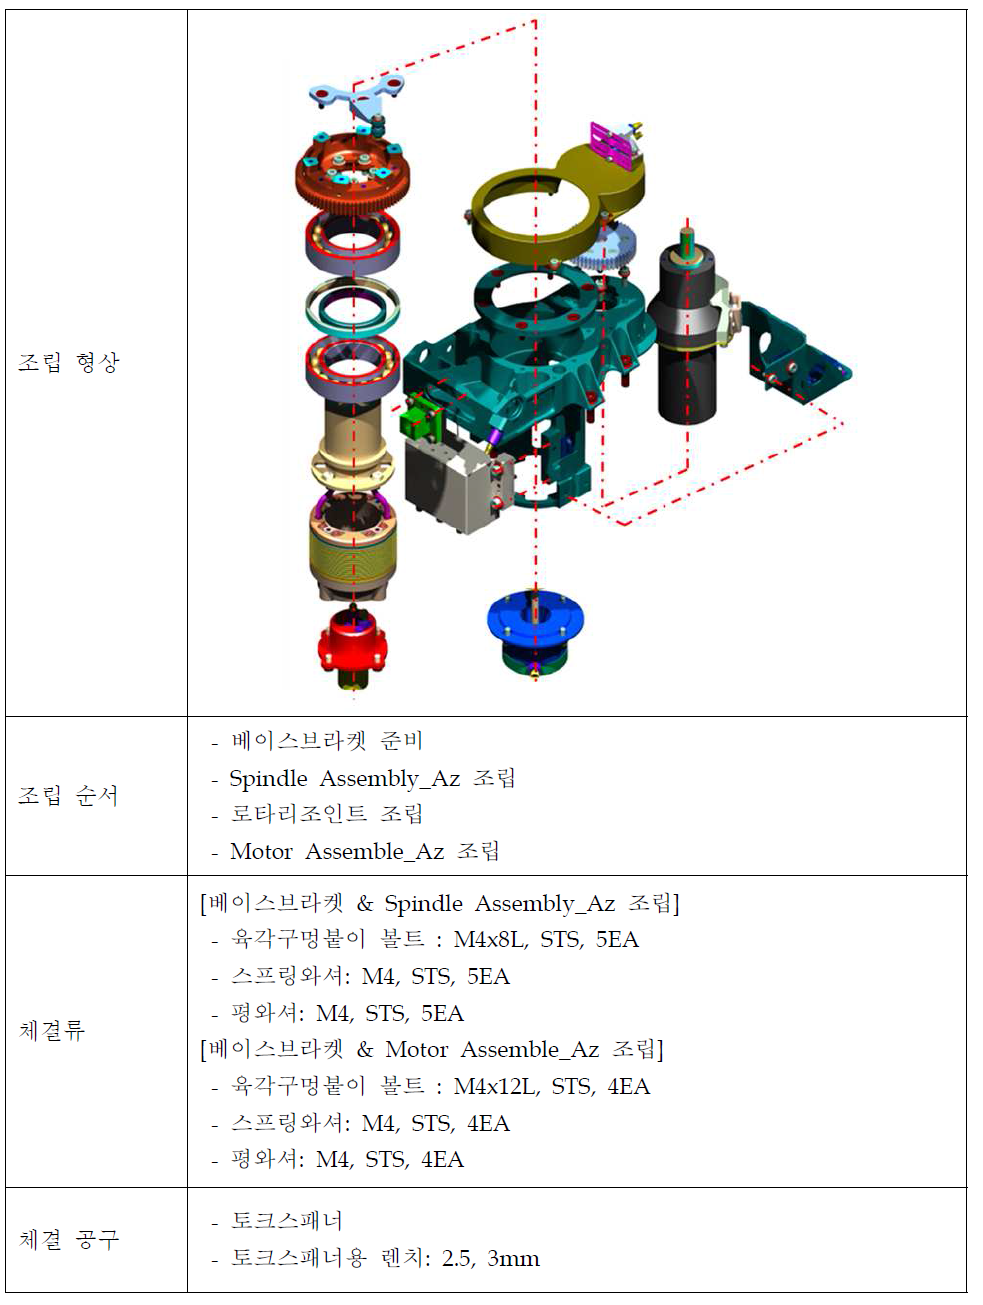 Azimuth assembly 조립 절차도